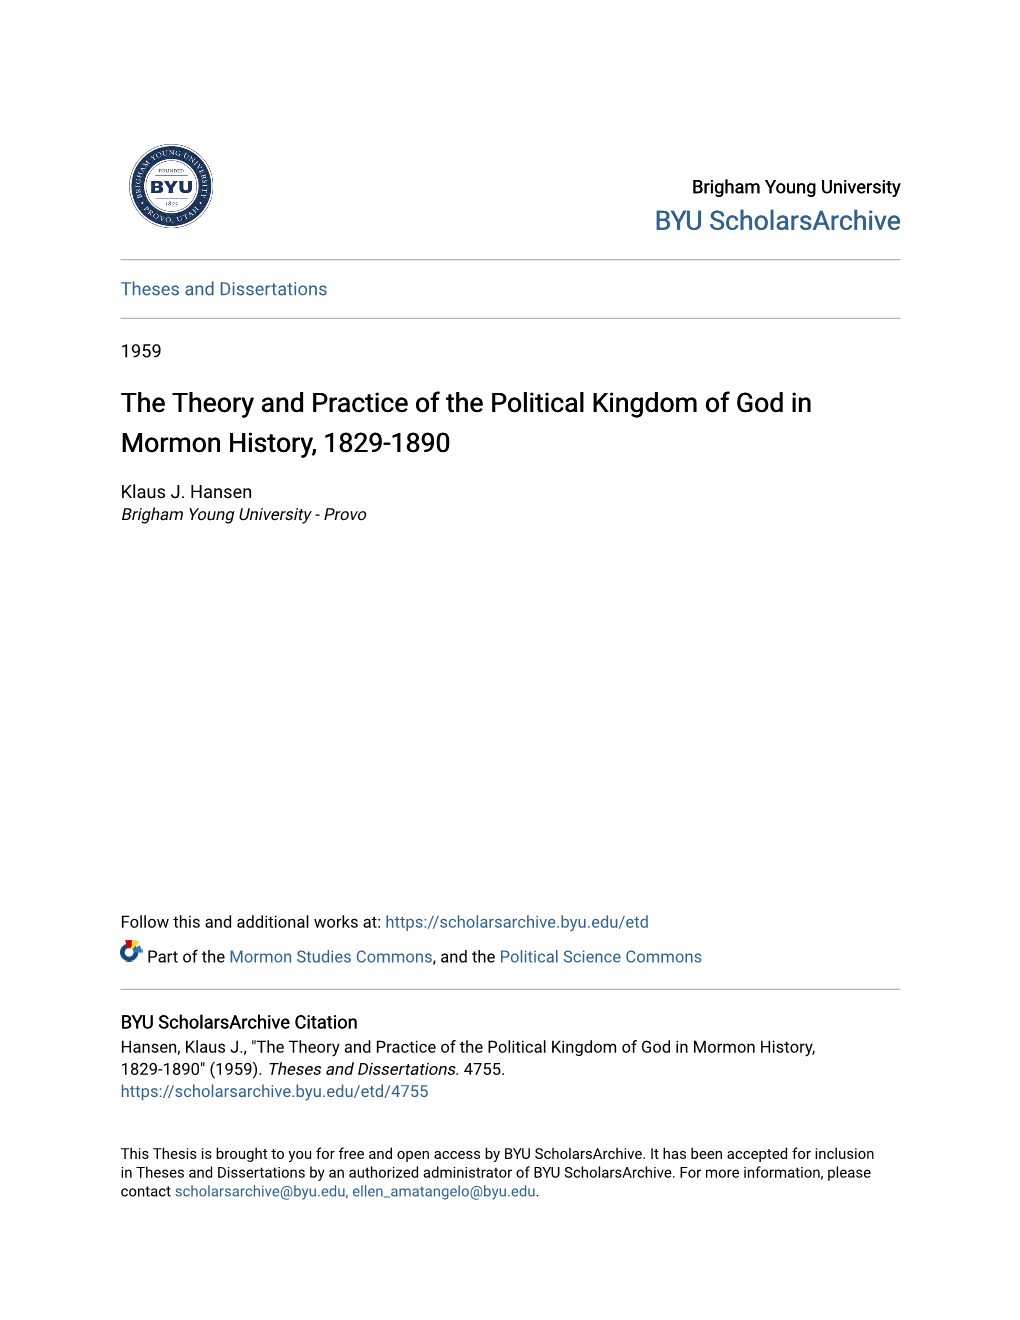 The Theory and Practice of the Political Kingdom of God in Mormon History, 1829-1890